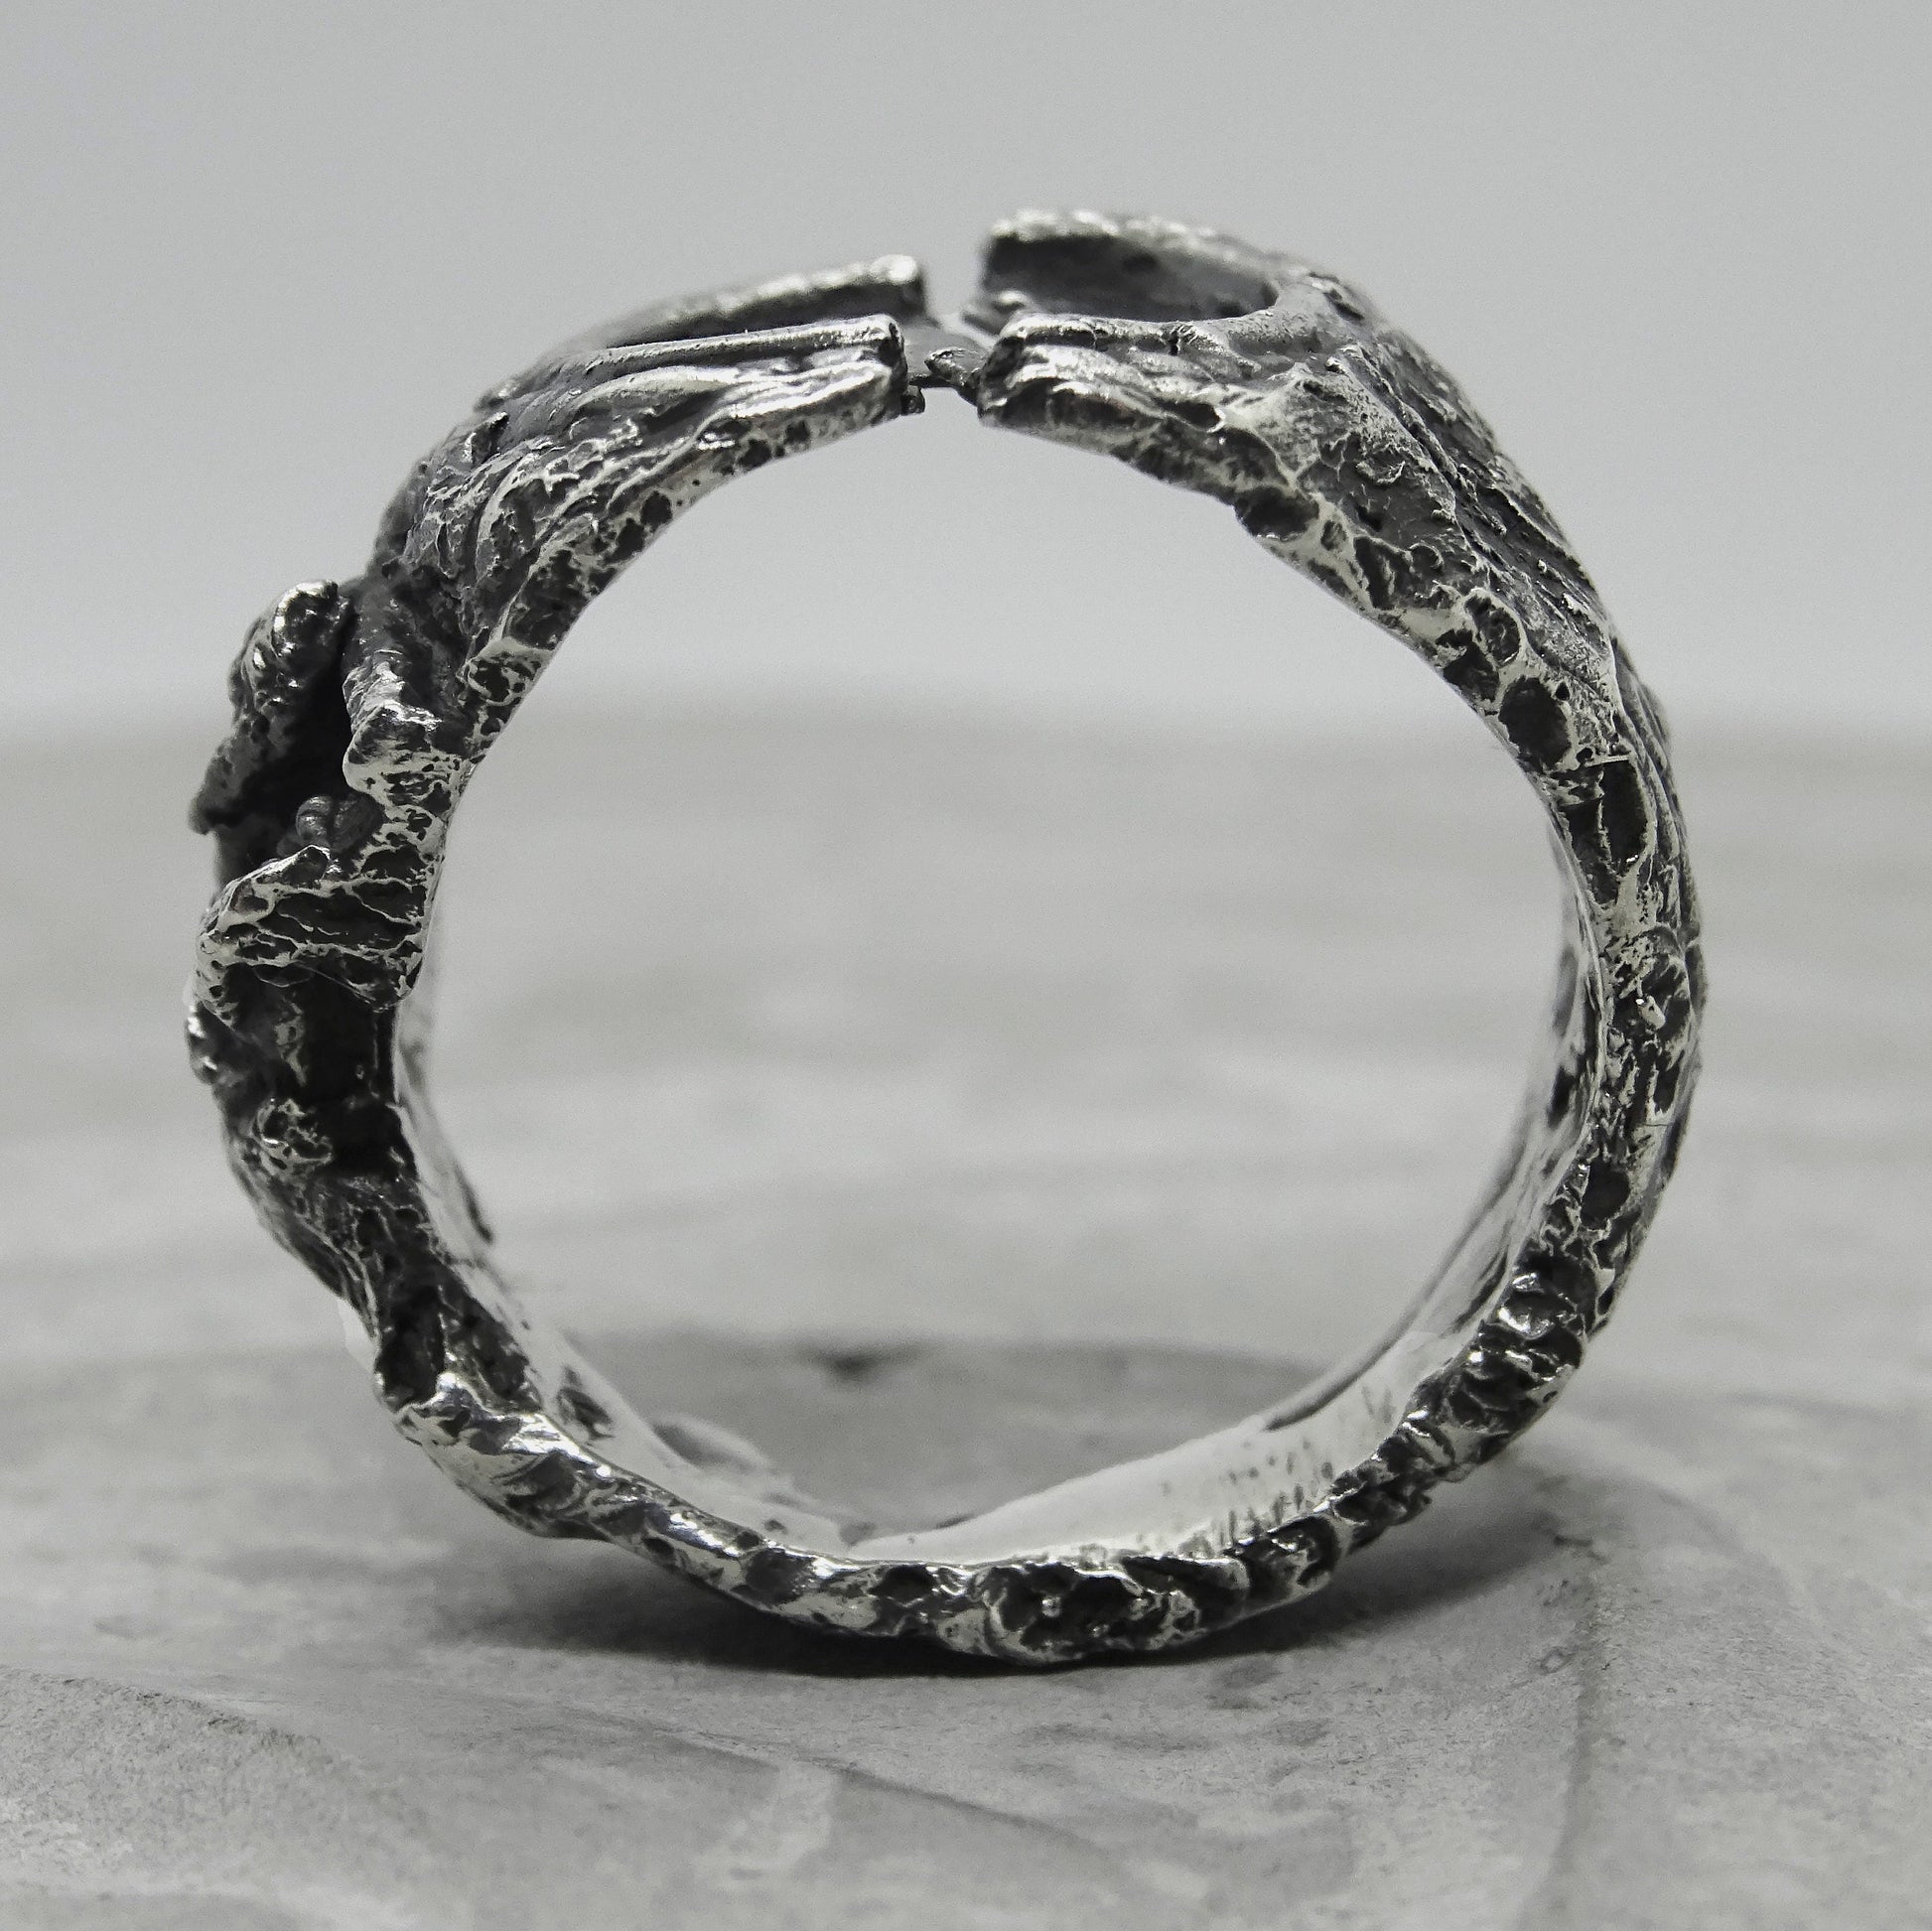 History ring- unusual open ring with a unique texture and blurry pattern Unusual rings Project50g 